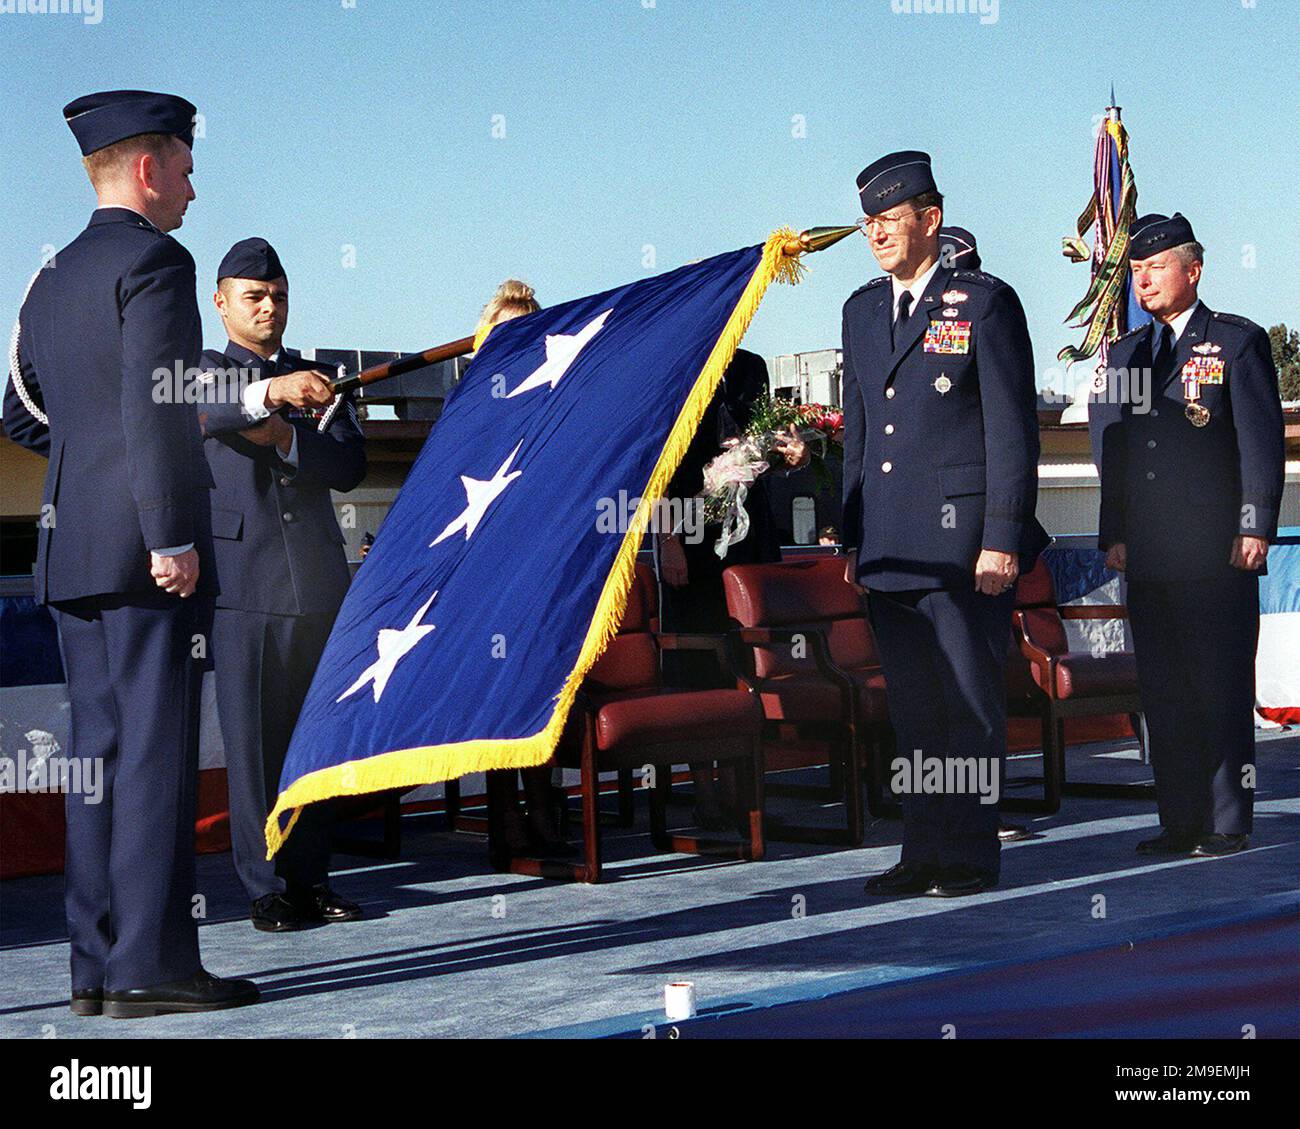 US Air Force Captain Bill Rupp (Far left), Executive Officer to Lieutenant General John B. Sams the Commander of 15th Air Force, stands ready to encase the flag while Technical Sergeant T.J. Silva (2nd from left), Enlisted Aide to LTGEN Sams, retires the 3 star flag that once flew for the former 15th Air Force Commander. General Tony Robertson (3rd from left), Air Mobility Command Commander at Scott Air Force Base, Illinois, presides over the ceremony. Base: Travis Air Force Base State: California (CA) Country: United States Of America (USA) Stock Photo